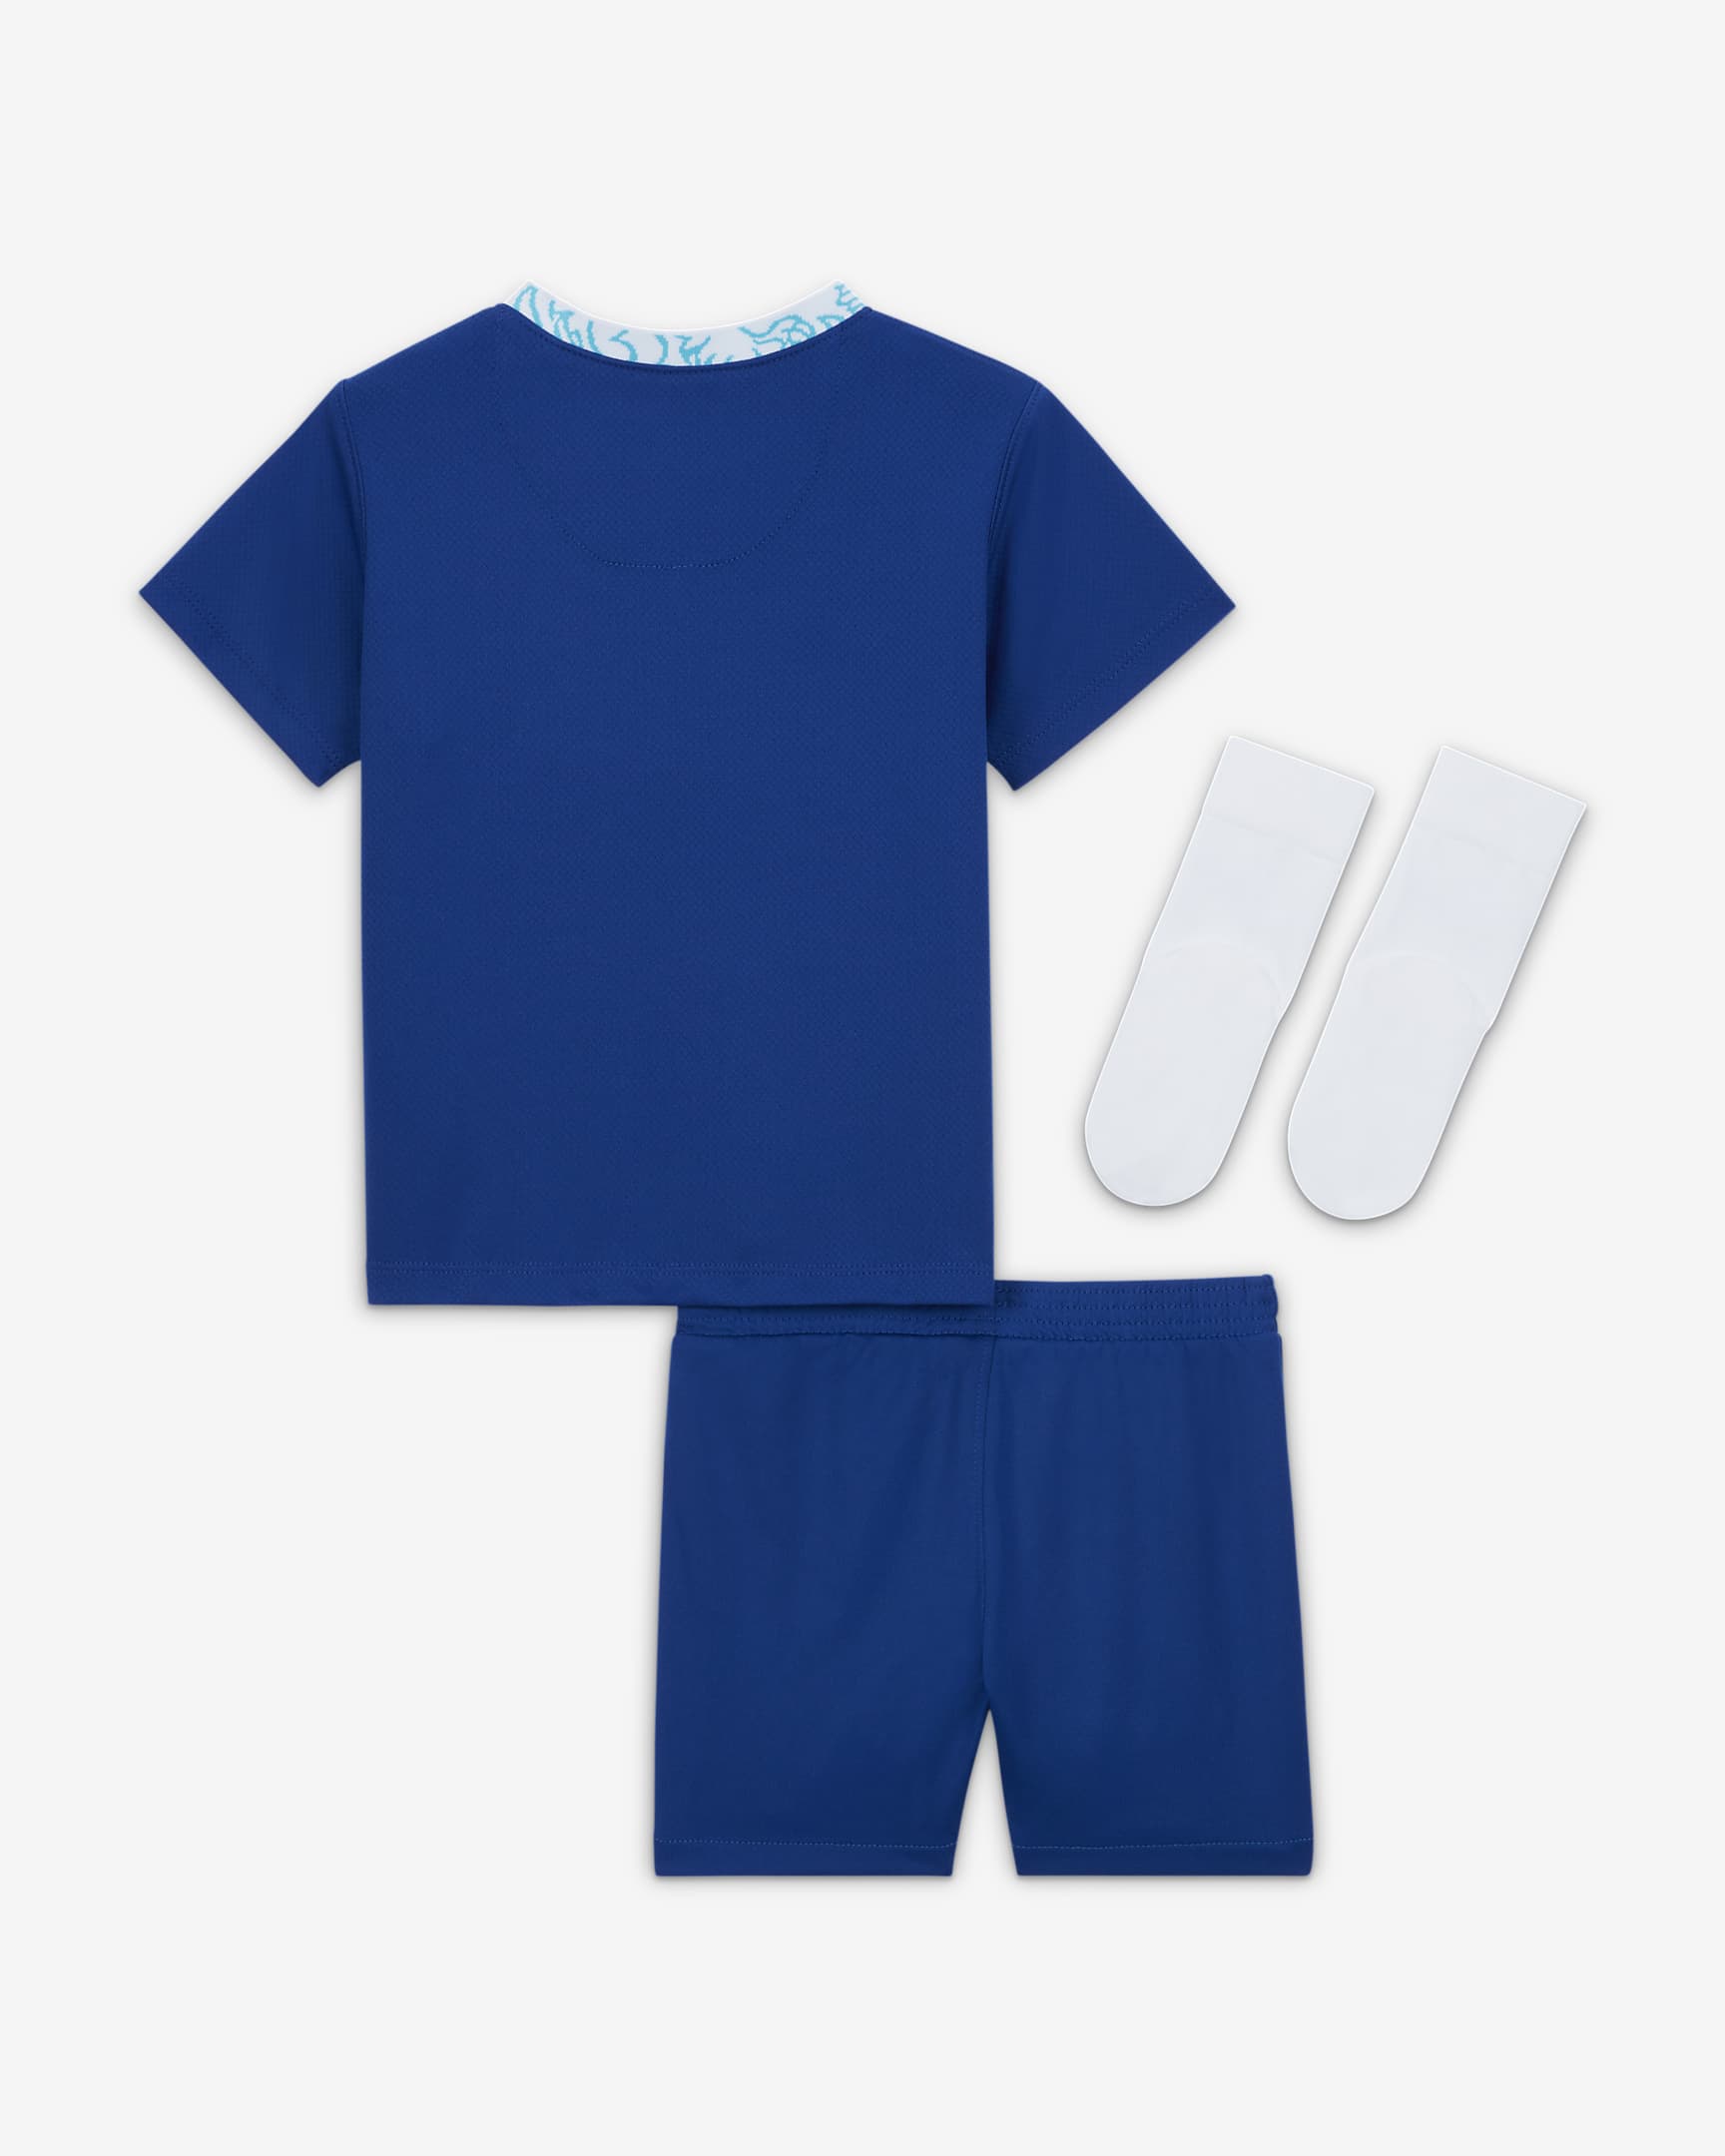 Chelsea F.C. 2022/23 Home Baby Football Kit. Nike IL